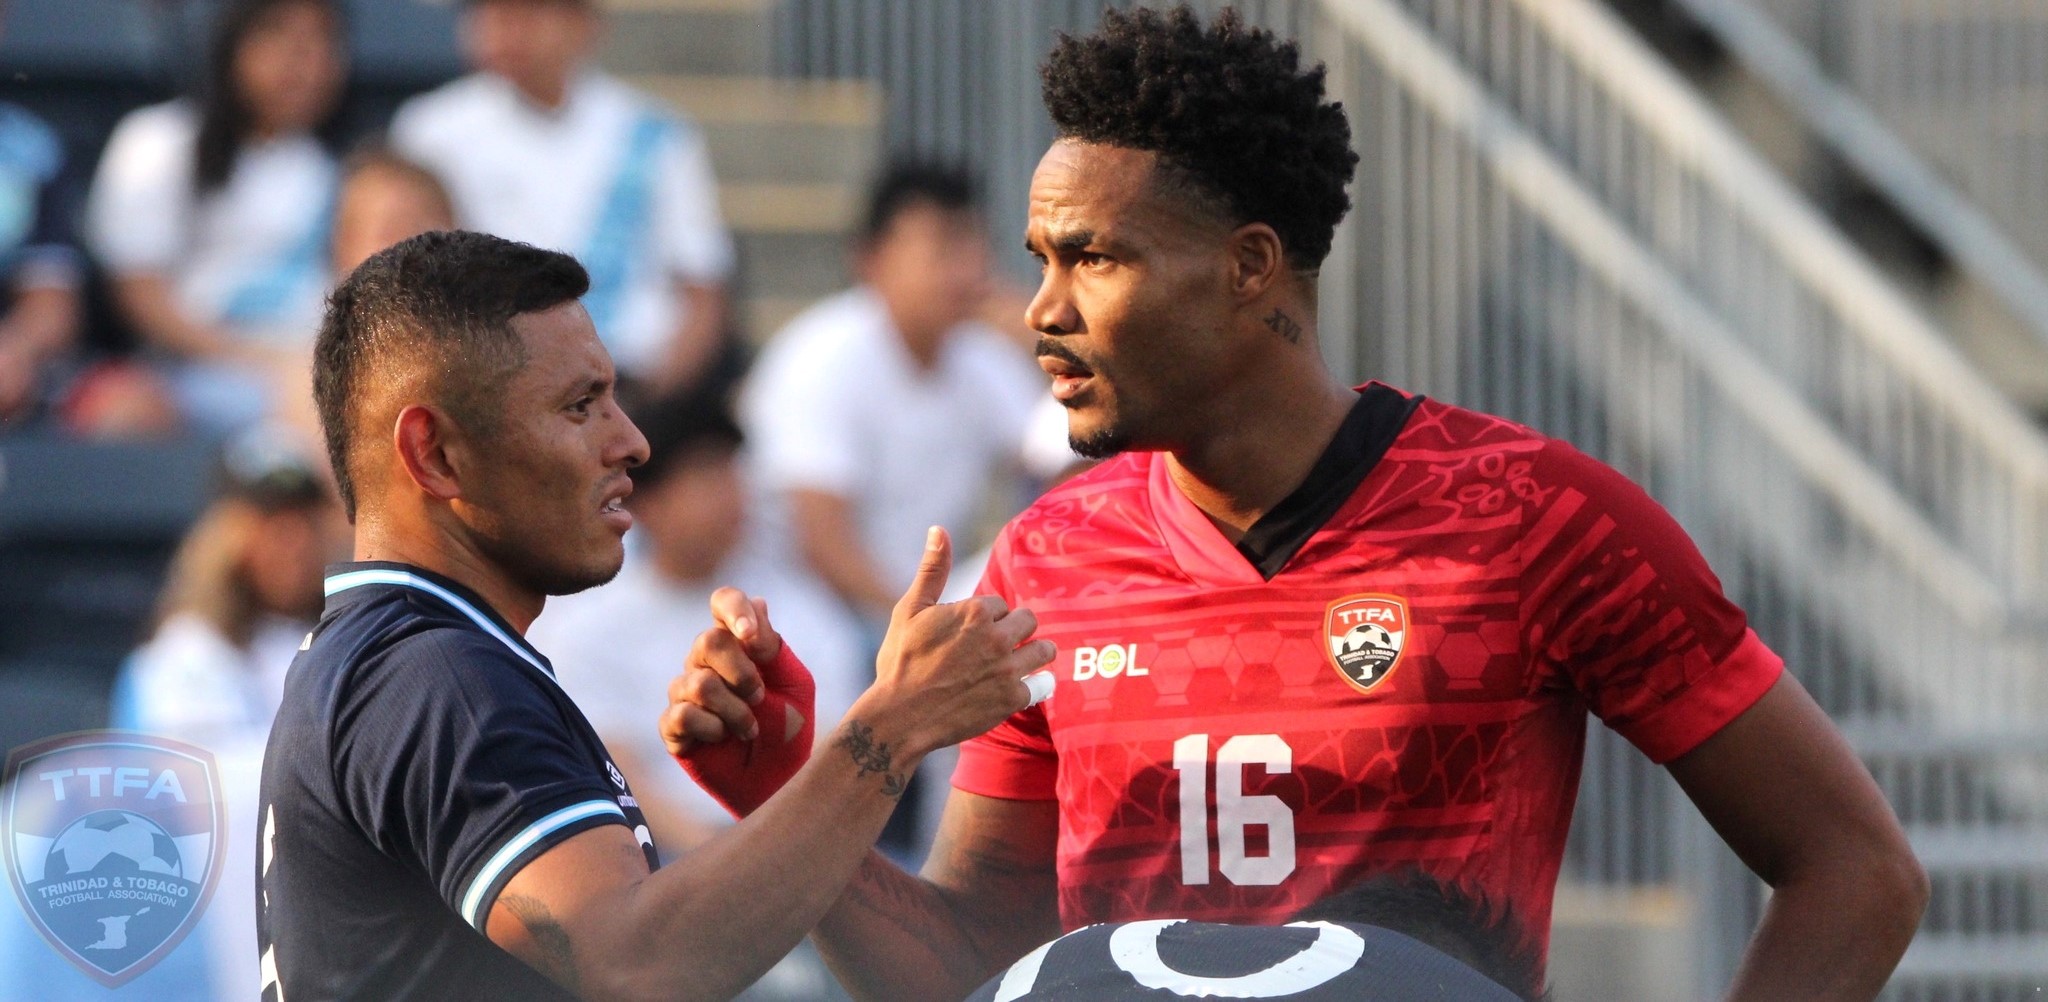 Trinidad and Tobago beat Guatemala 1-0 ahead of Gold Cup qualifier.